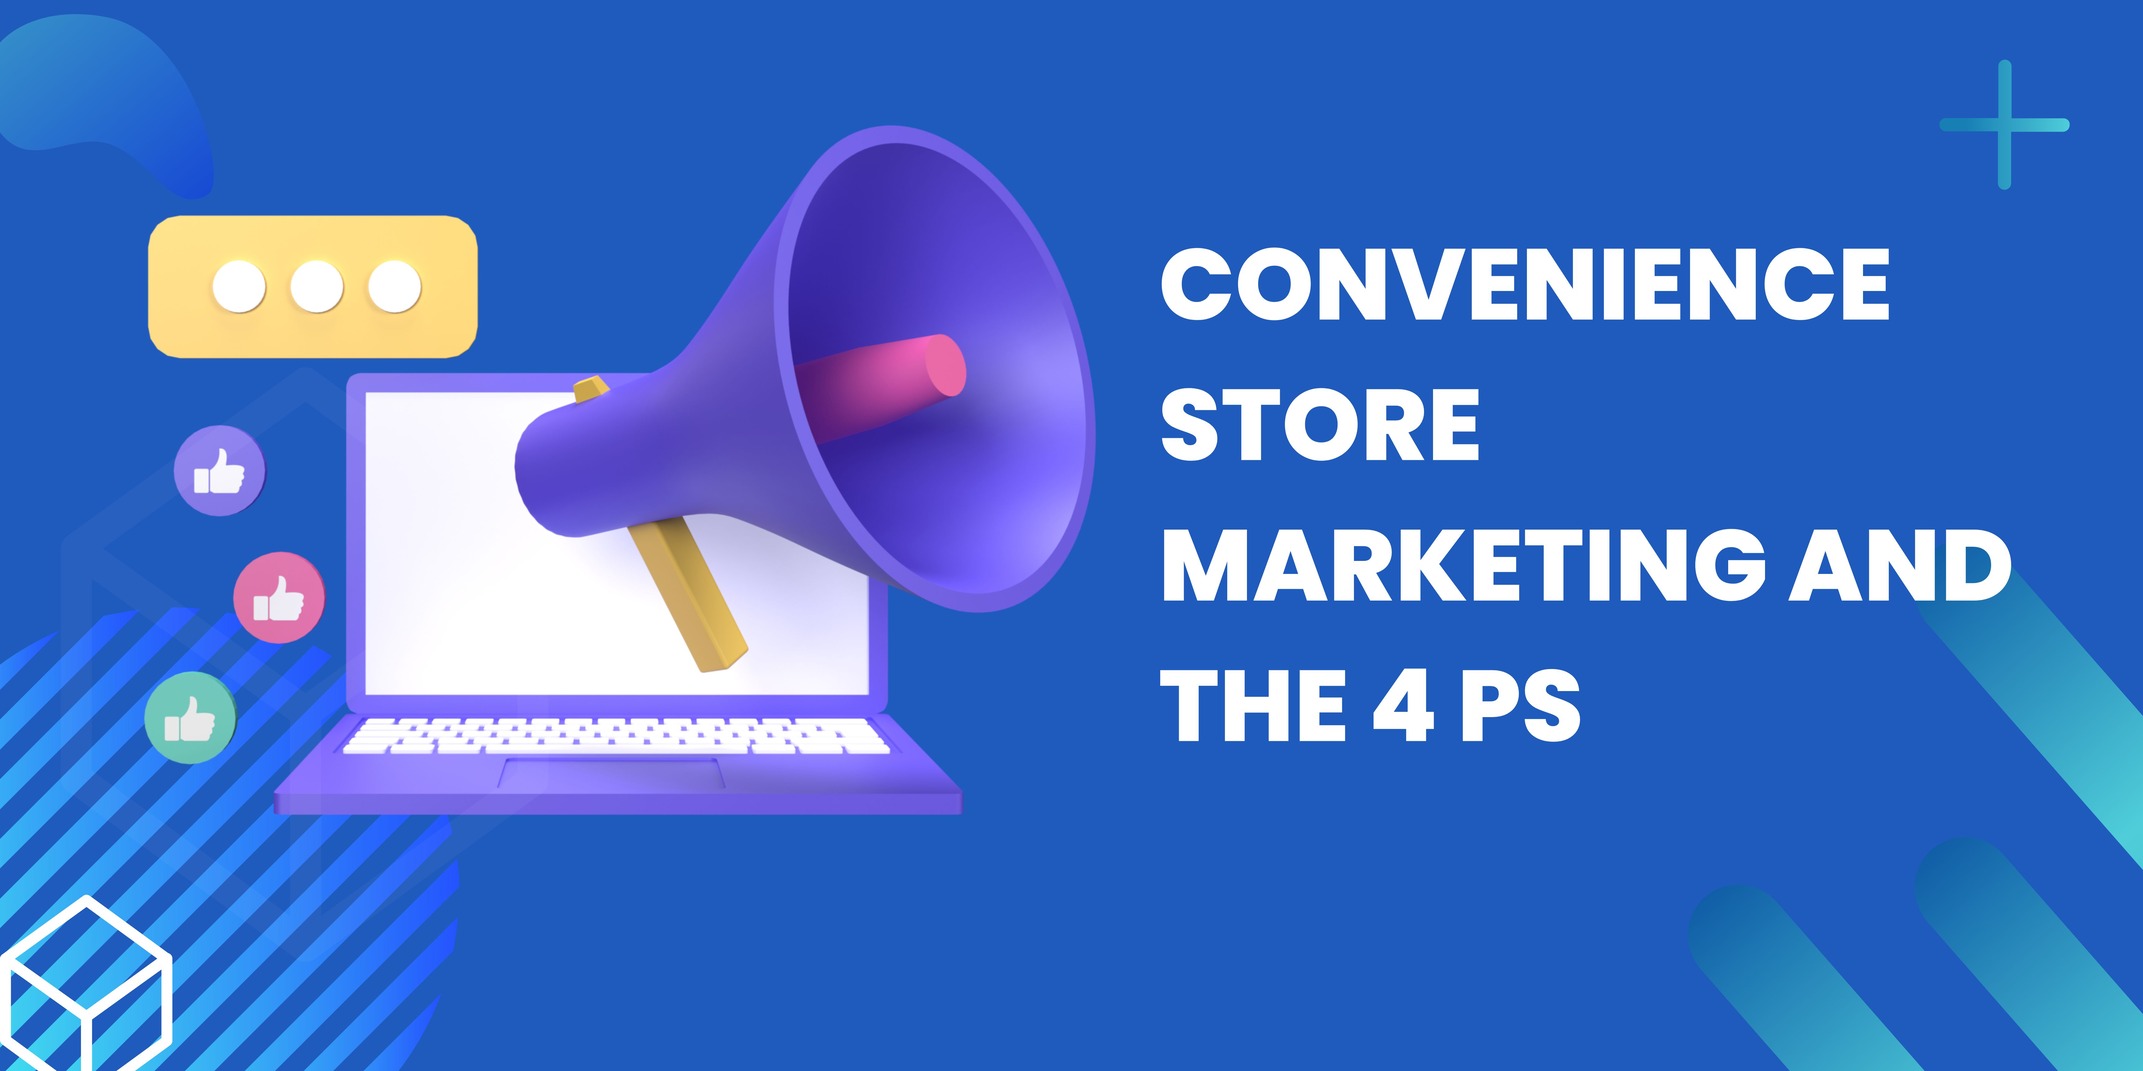 Convenience-Store-Marketing-And-The-4-Ps-By-Renaissance-Marekting-1-1